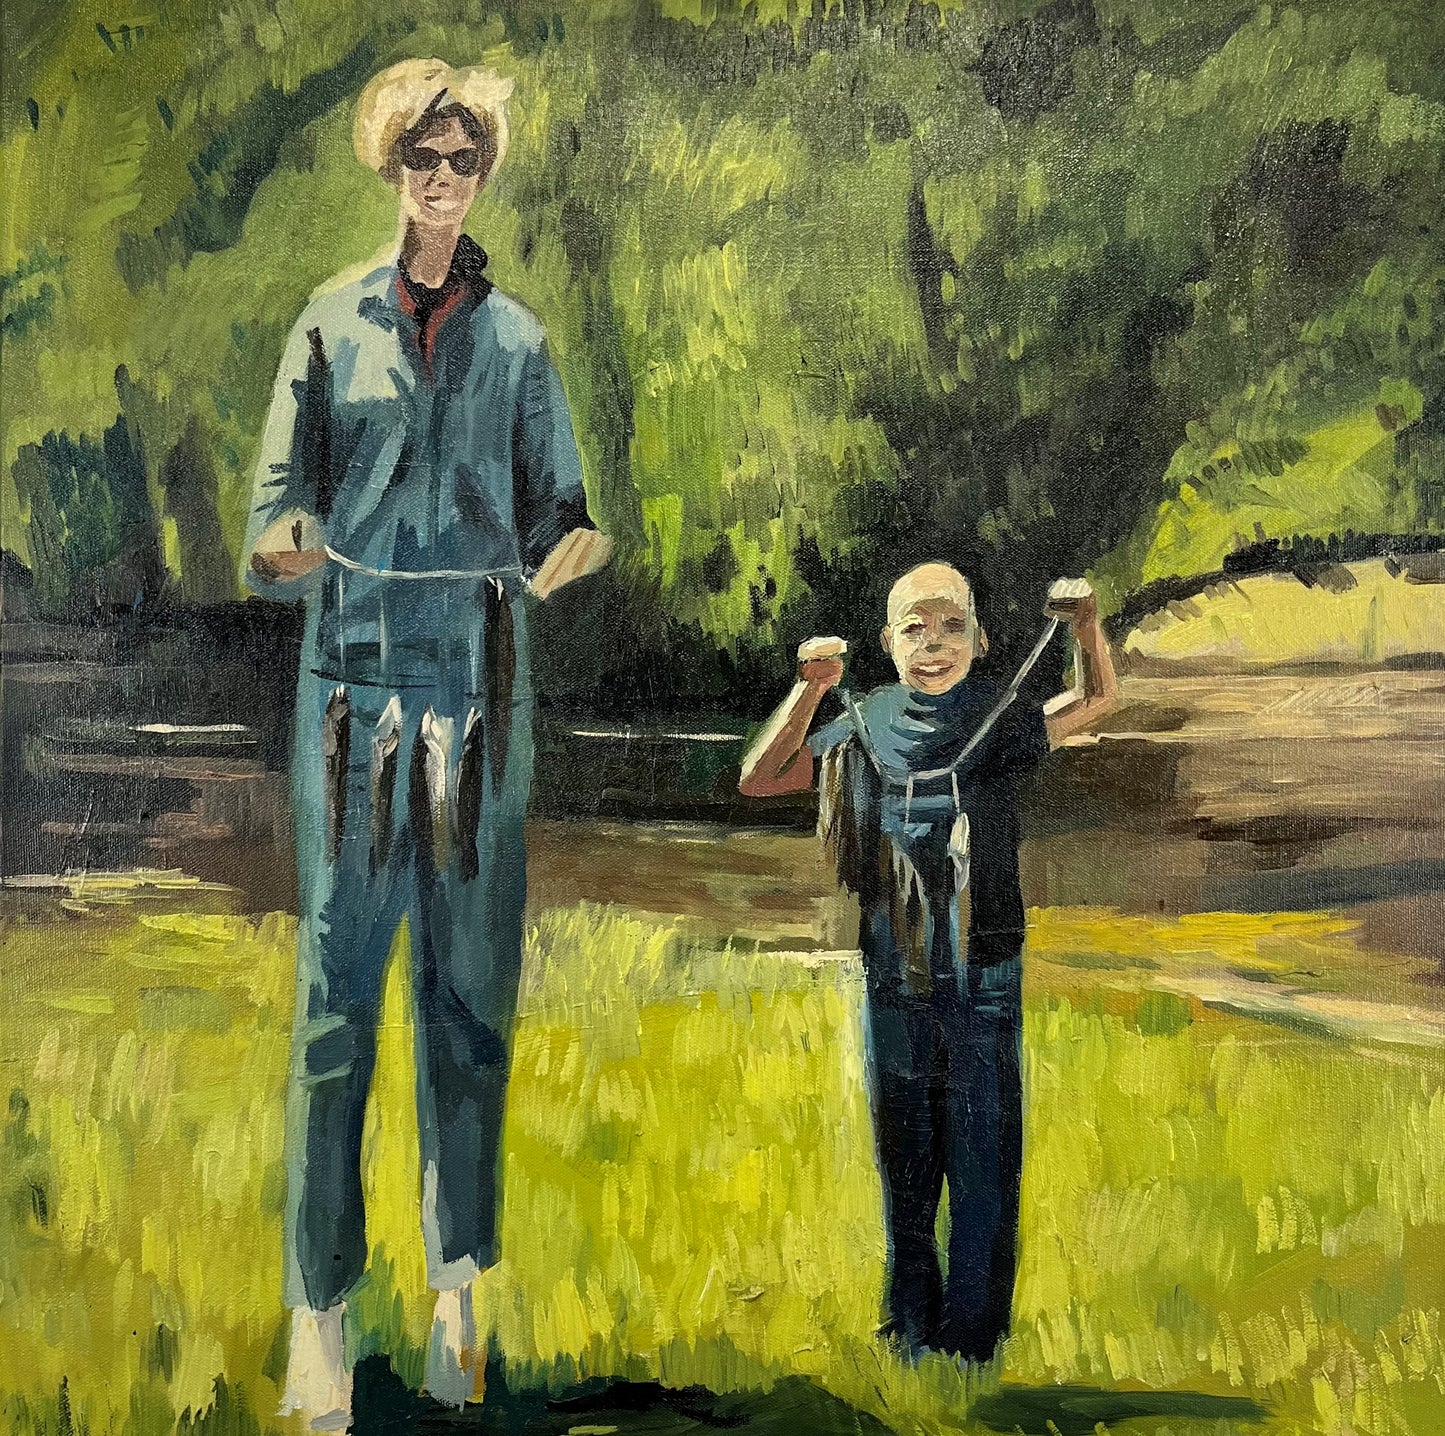 My Mom and Cousin Mike in 1969. Oil on Canvas. 24" x 24" x 1.5". John Kline Artwork.